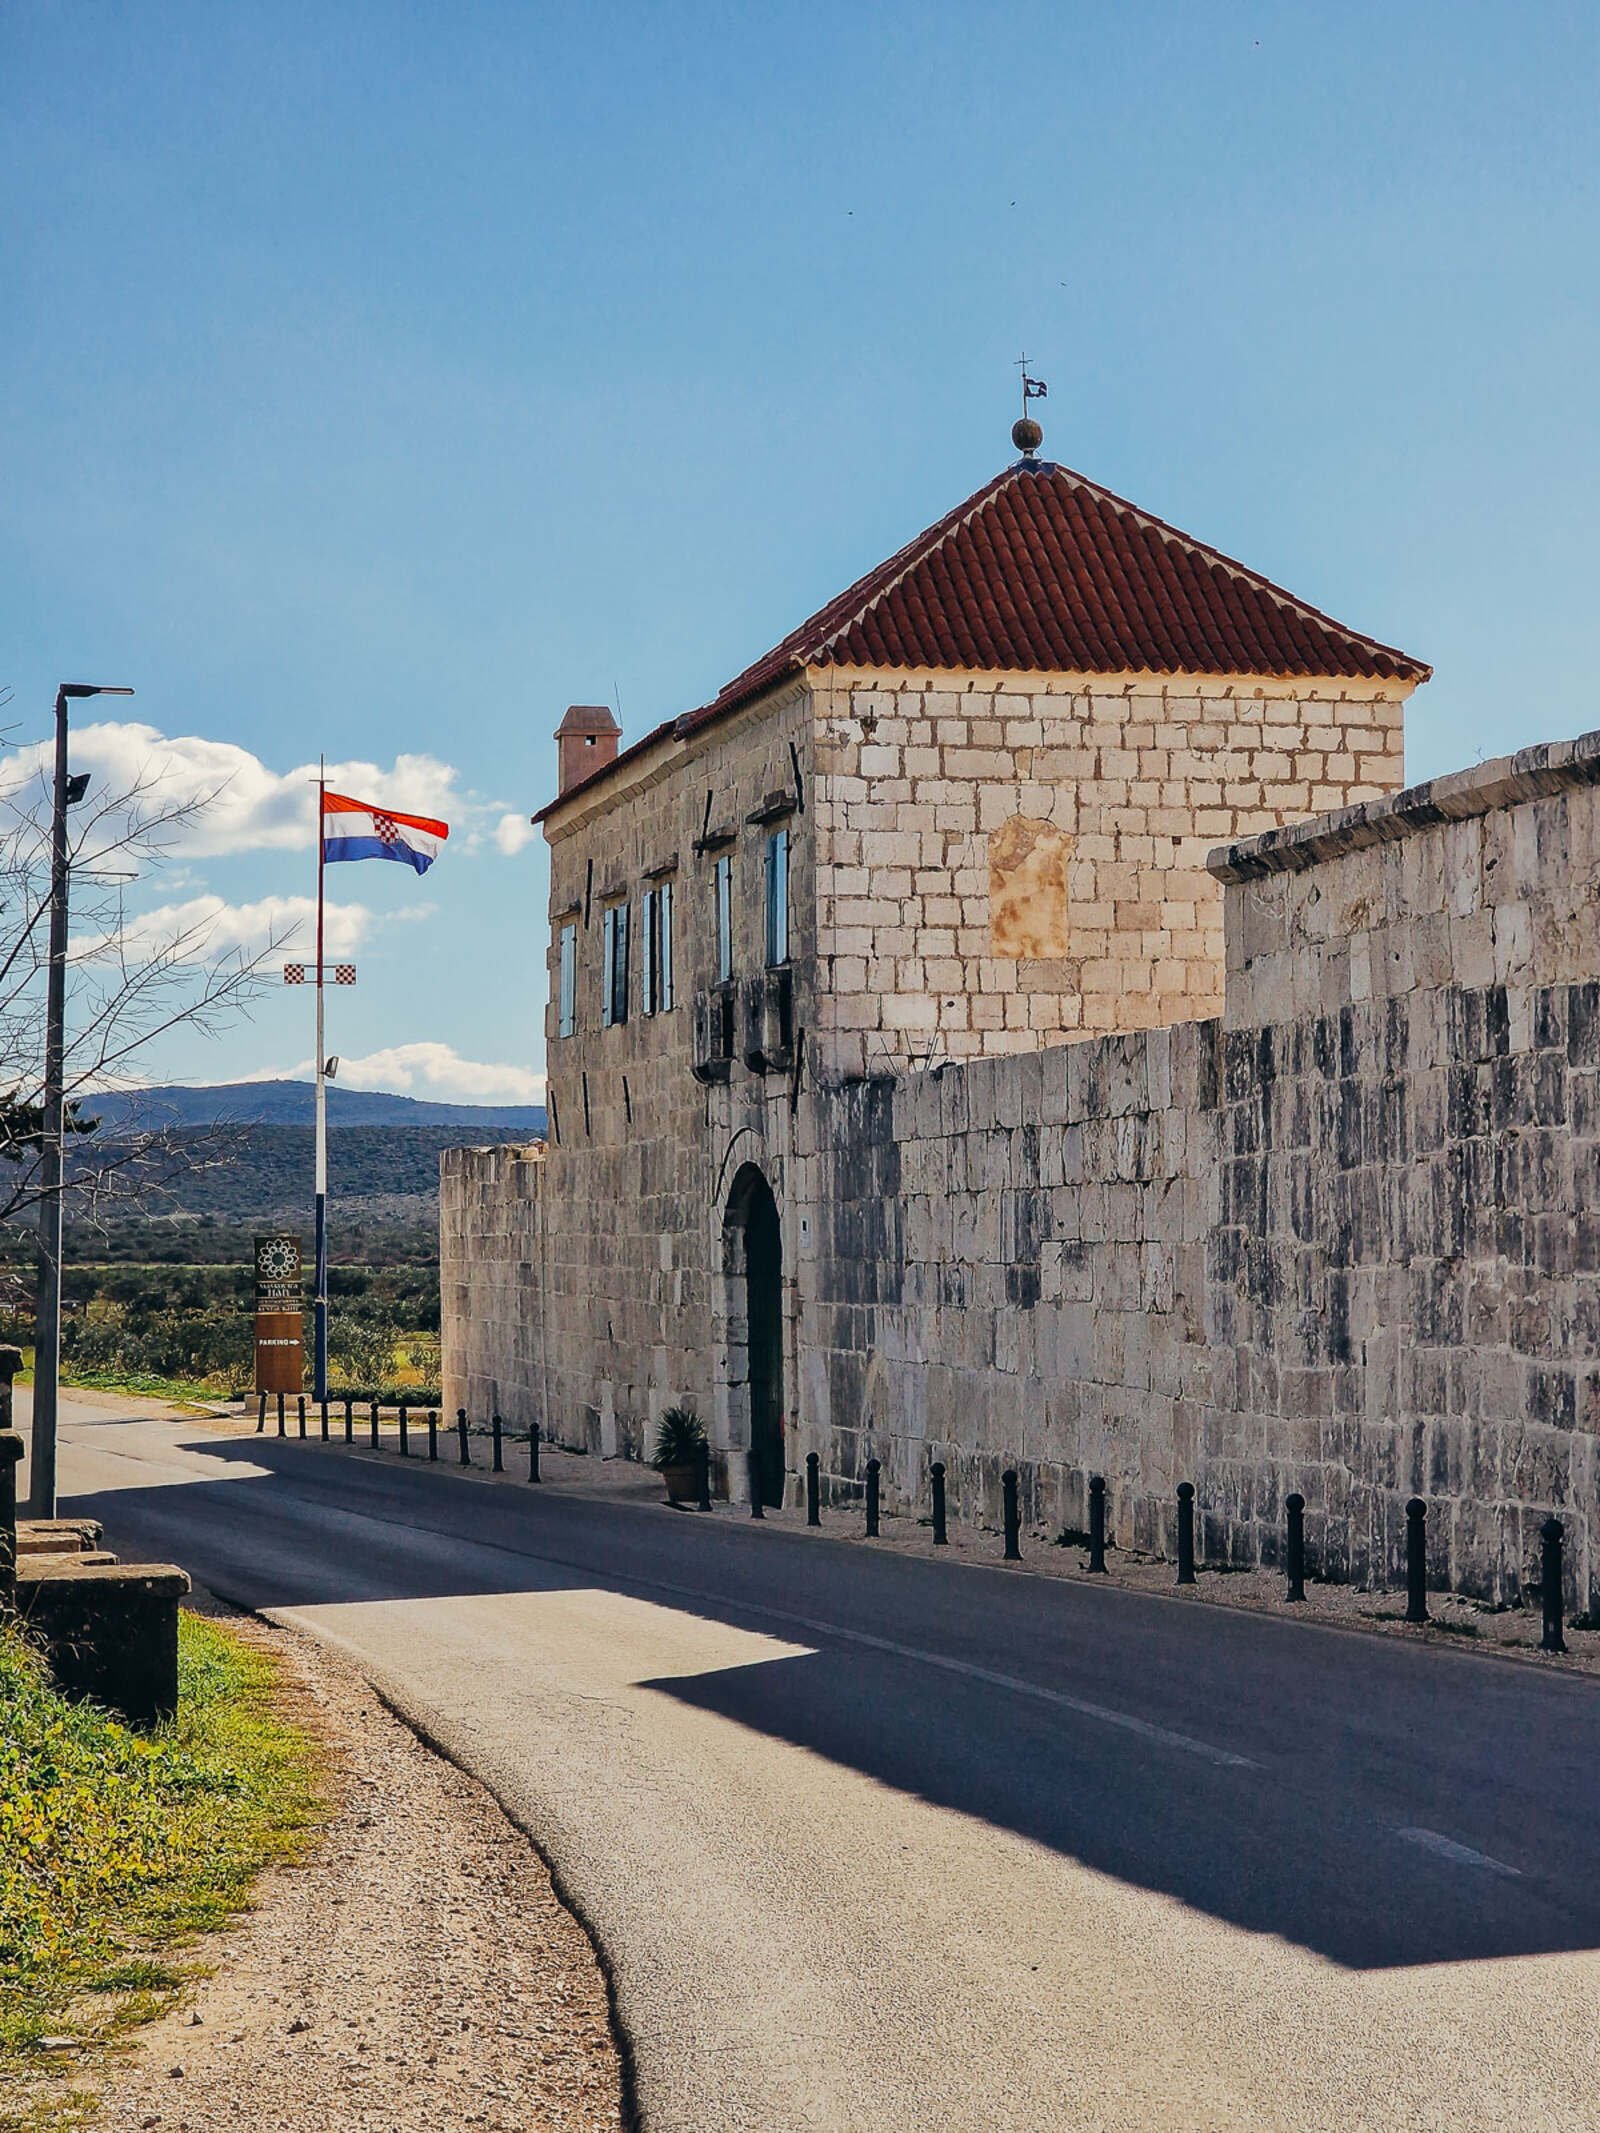 A large square stone building that looks very old with a red tile roof and a Croatian flag flying outside. It's right next to the road and the sky is blue